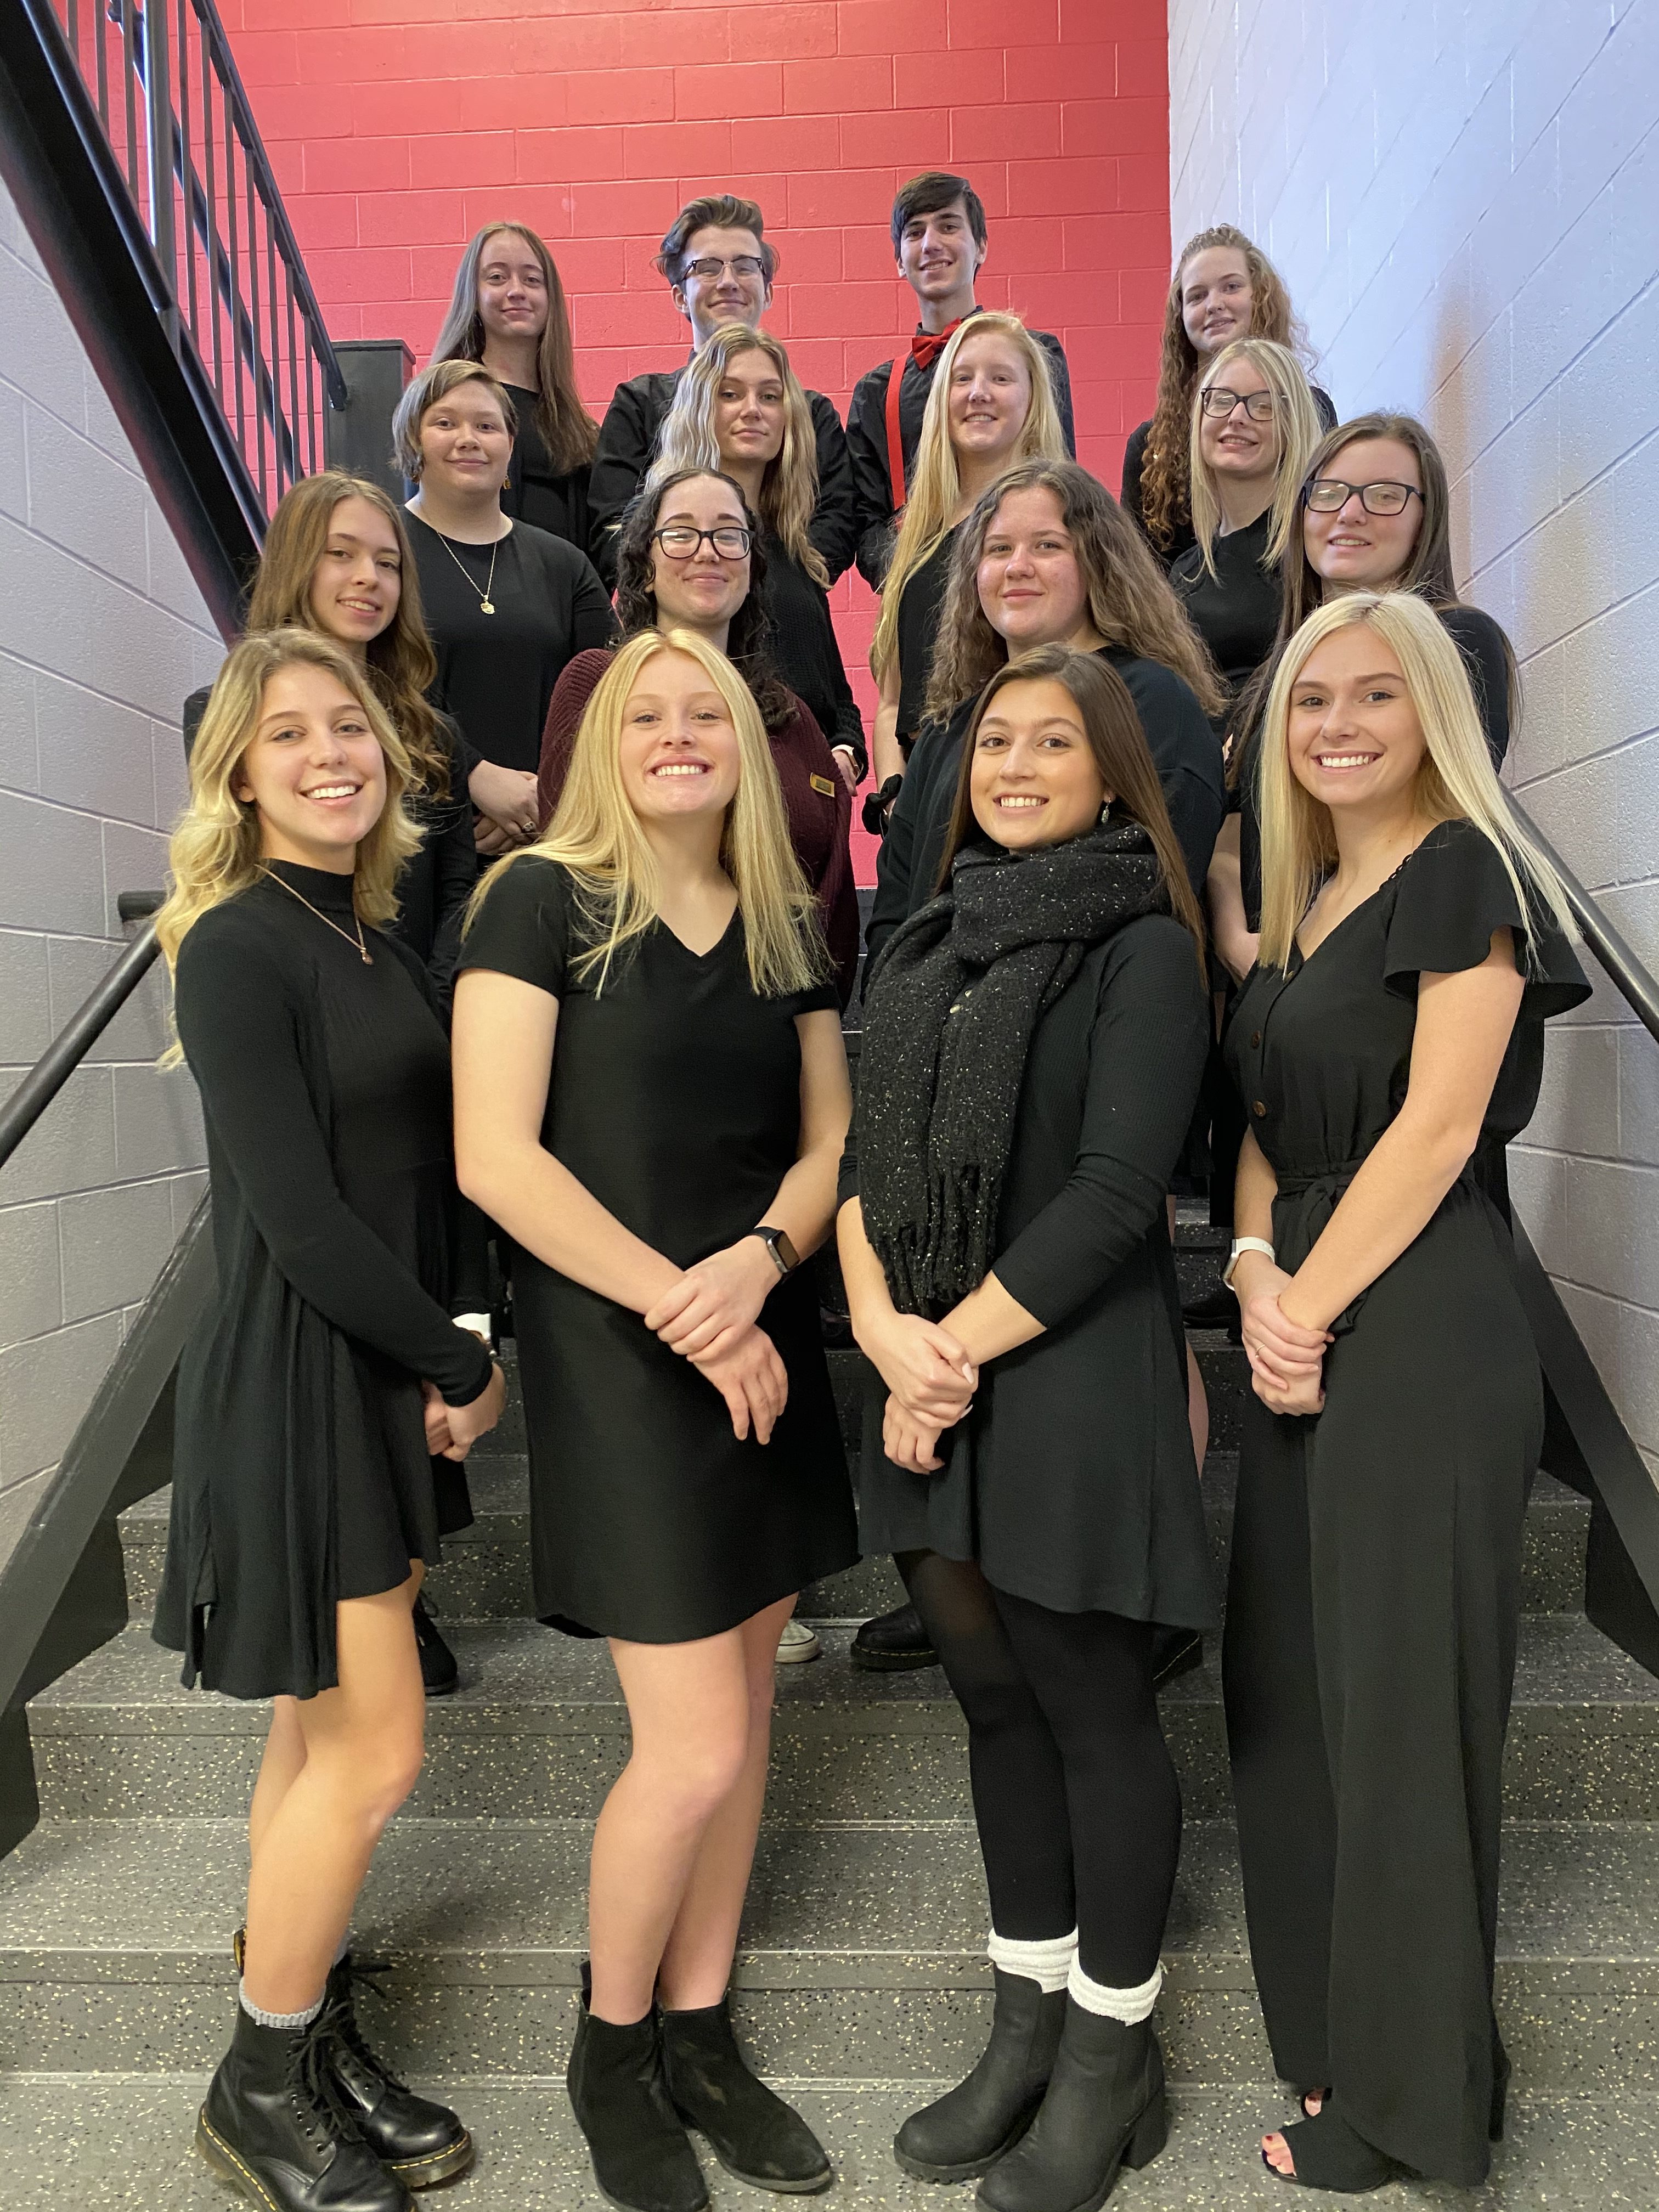 Pictured are the Clearfield Area Junior-Senior High School Queen of Hearts candidates. In the back, from left, are: Kyra Mollura, Cruz Wright, Lennon Miller and Kelseekay Charles.
In the third row are: Isabelle Passmore, Alyssa Twigg, Raegan Mikesell and Kimberly Wilsoncroft. In the second row are: Taylor Trinidad, Kaitlyn McBride, Anna Hale and Mclain Alt.
In front, from left, are: Avry Grumblatt, Adrian Rowles, Bella Spingola and Madison Davis. (Provided photo)